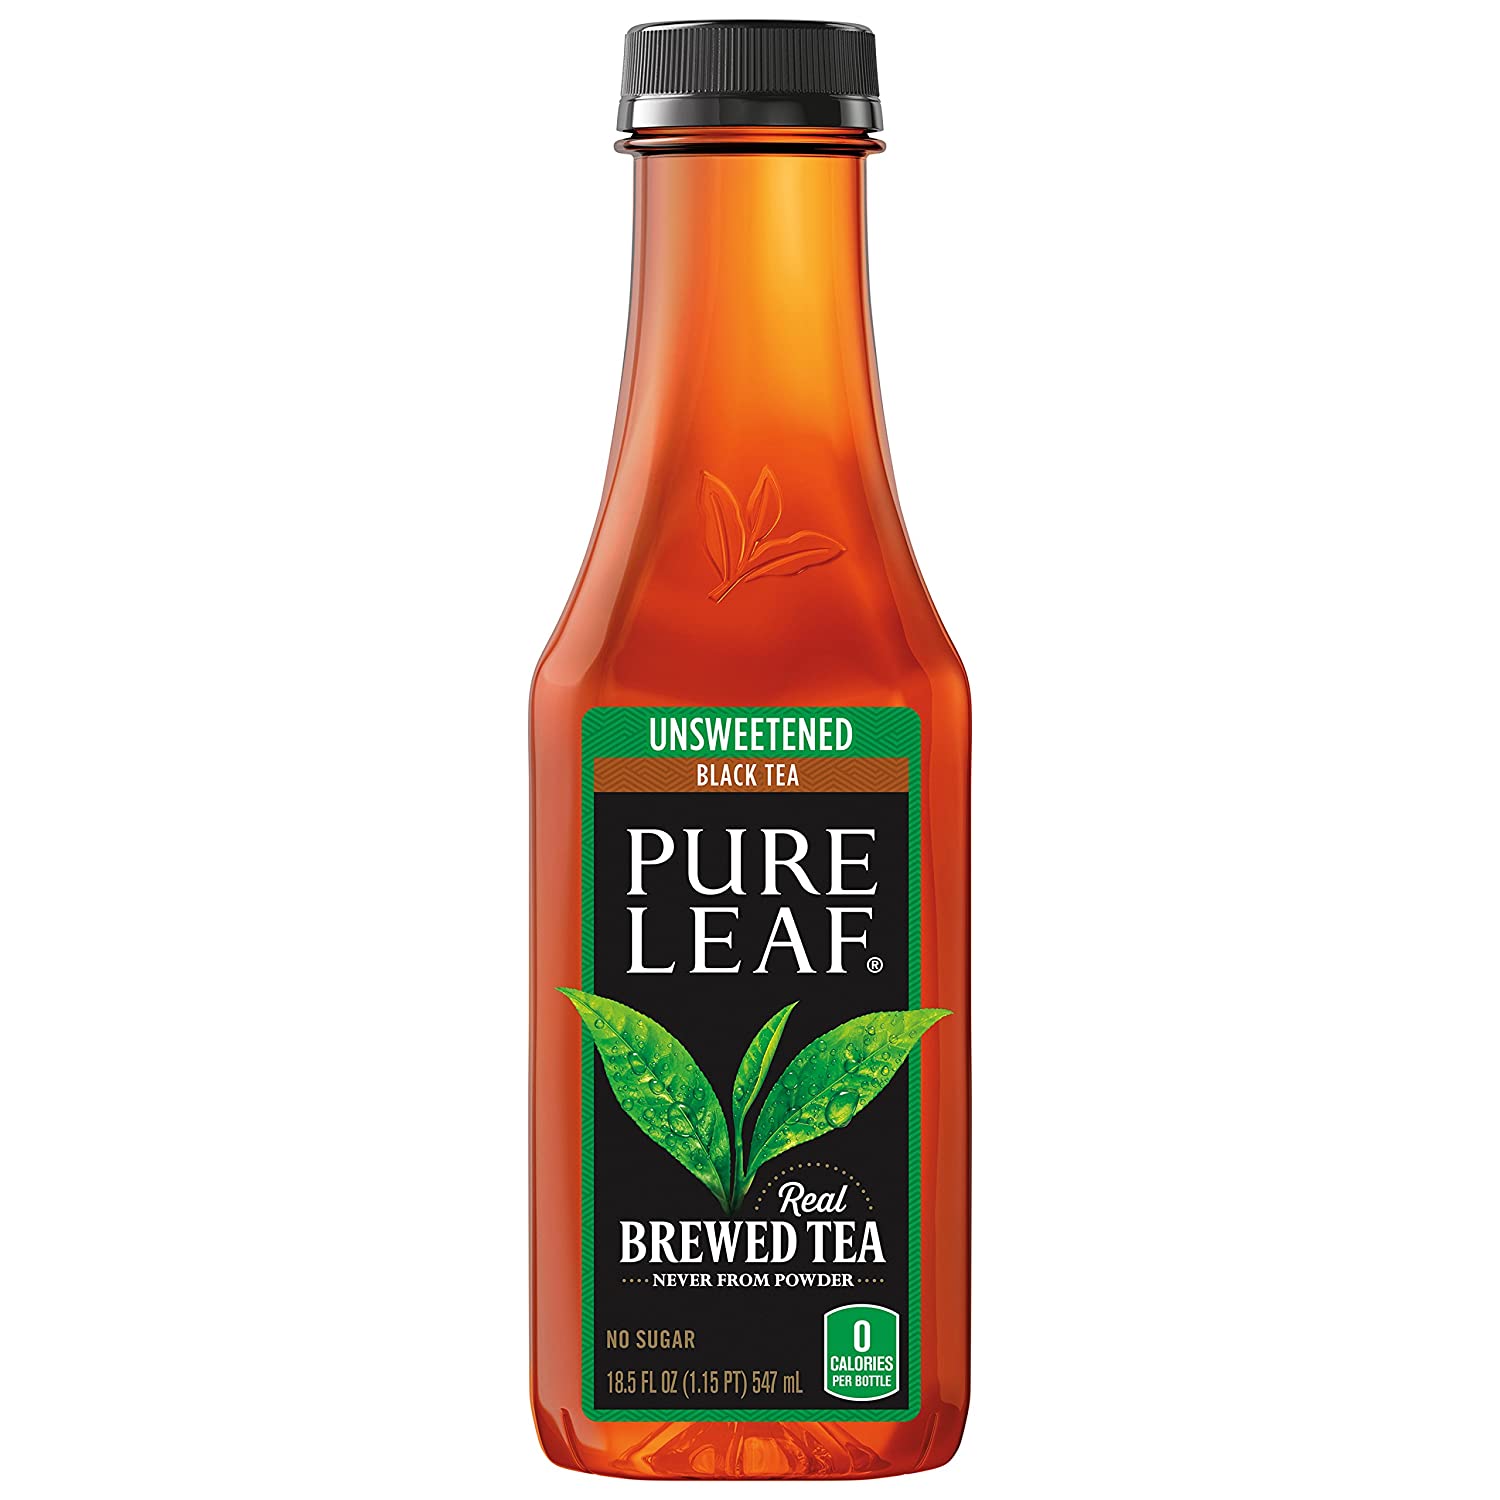 Pure Leaf Review